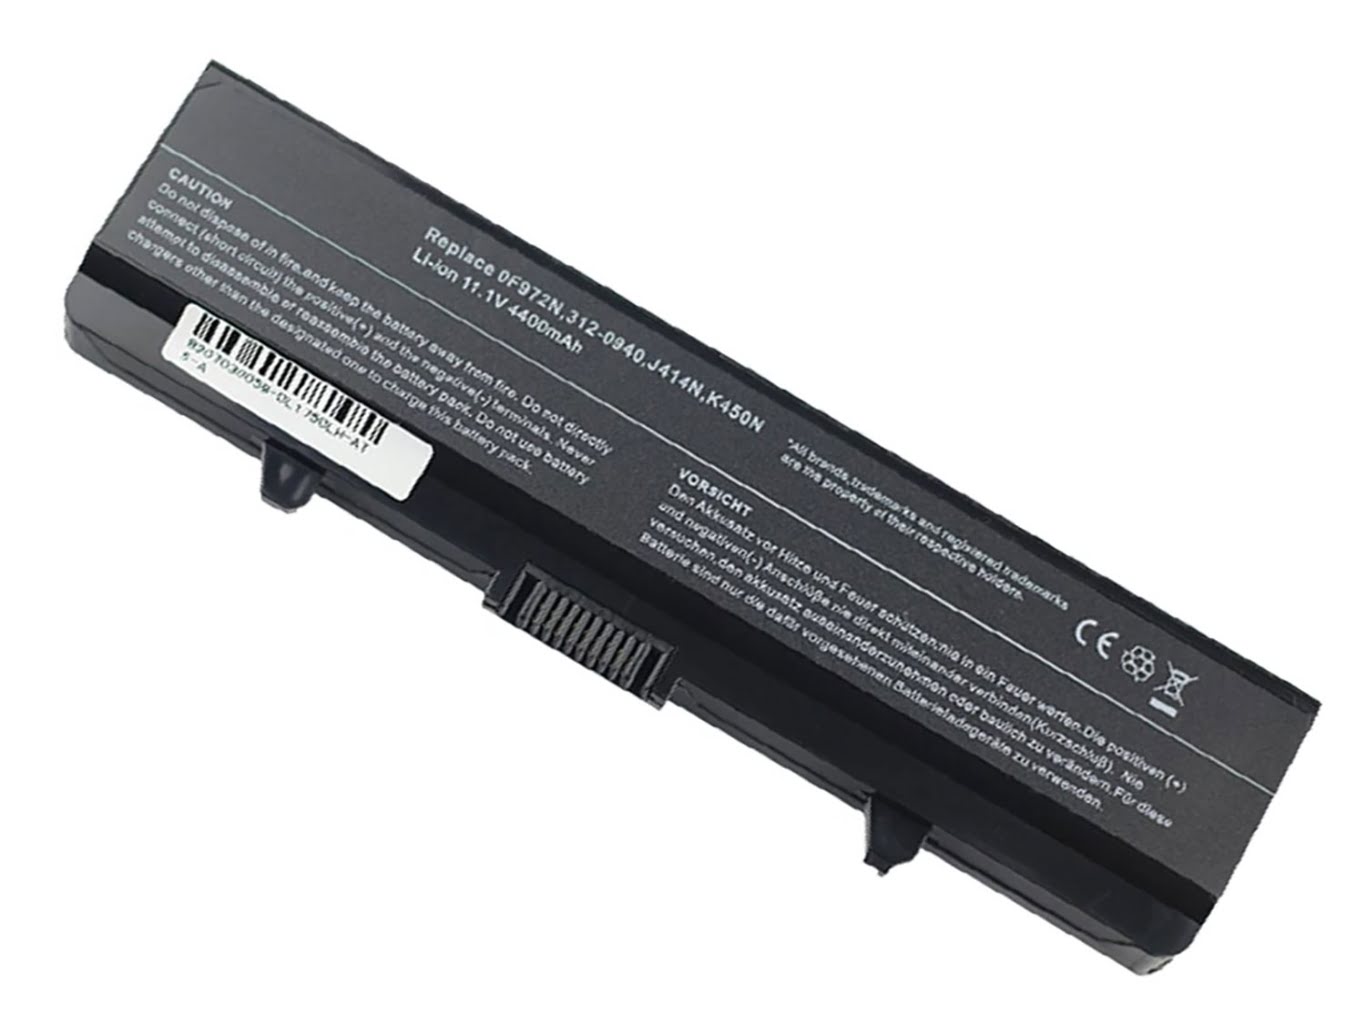 0F972N, 0G558N replacement Laptop Battery for Dell Inspiron 1440, Inspiron 1440n, 6 cells, 11.1V, 4400mah/49wh